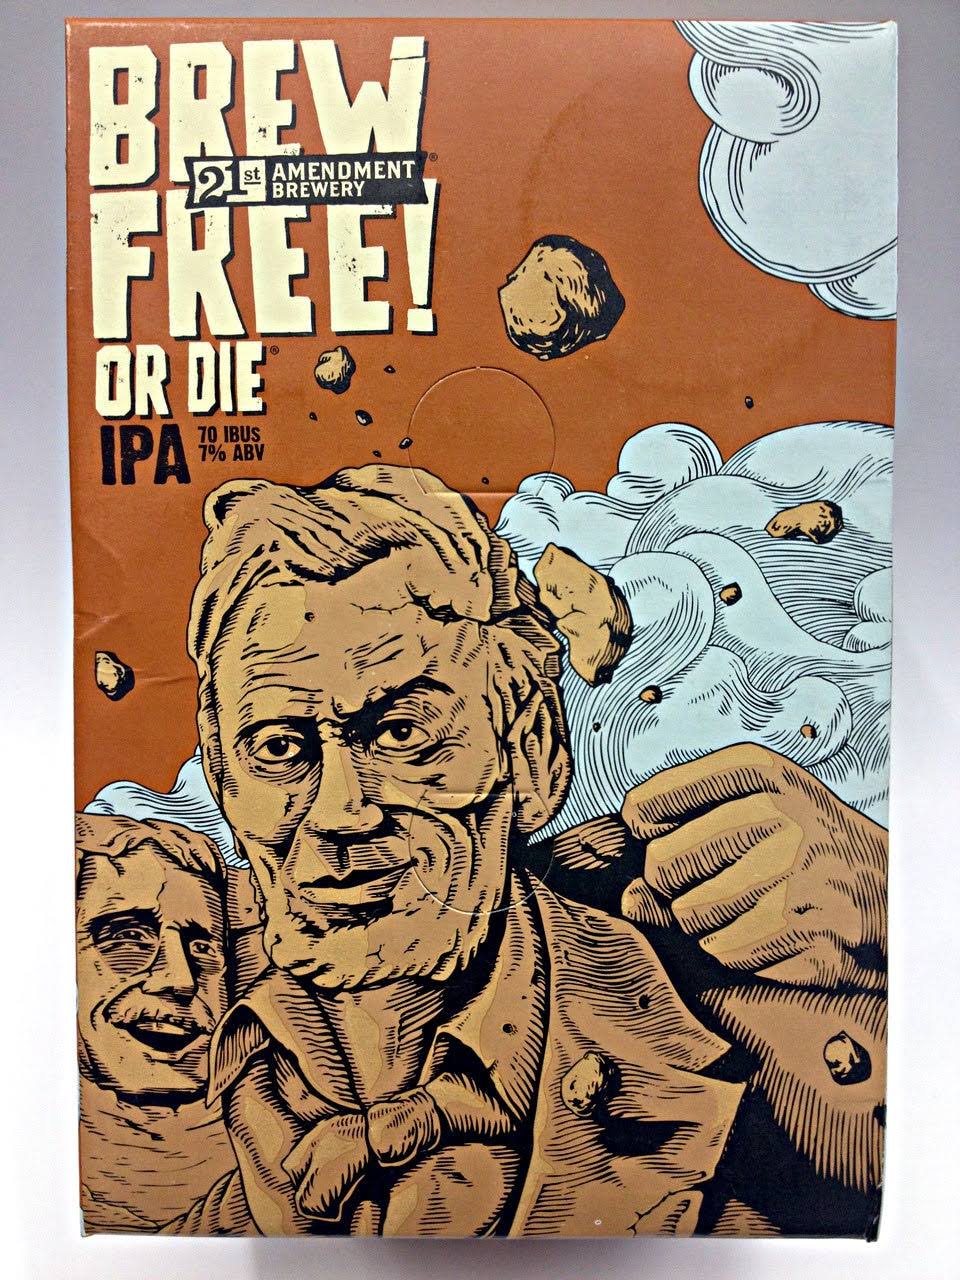 21ST AMMENDMENT BREWERY Ale, India Pale, Brew Free! Or Die IPA - 6 pack, 12 oz cans